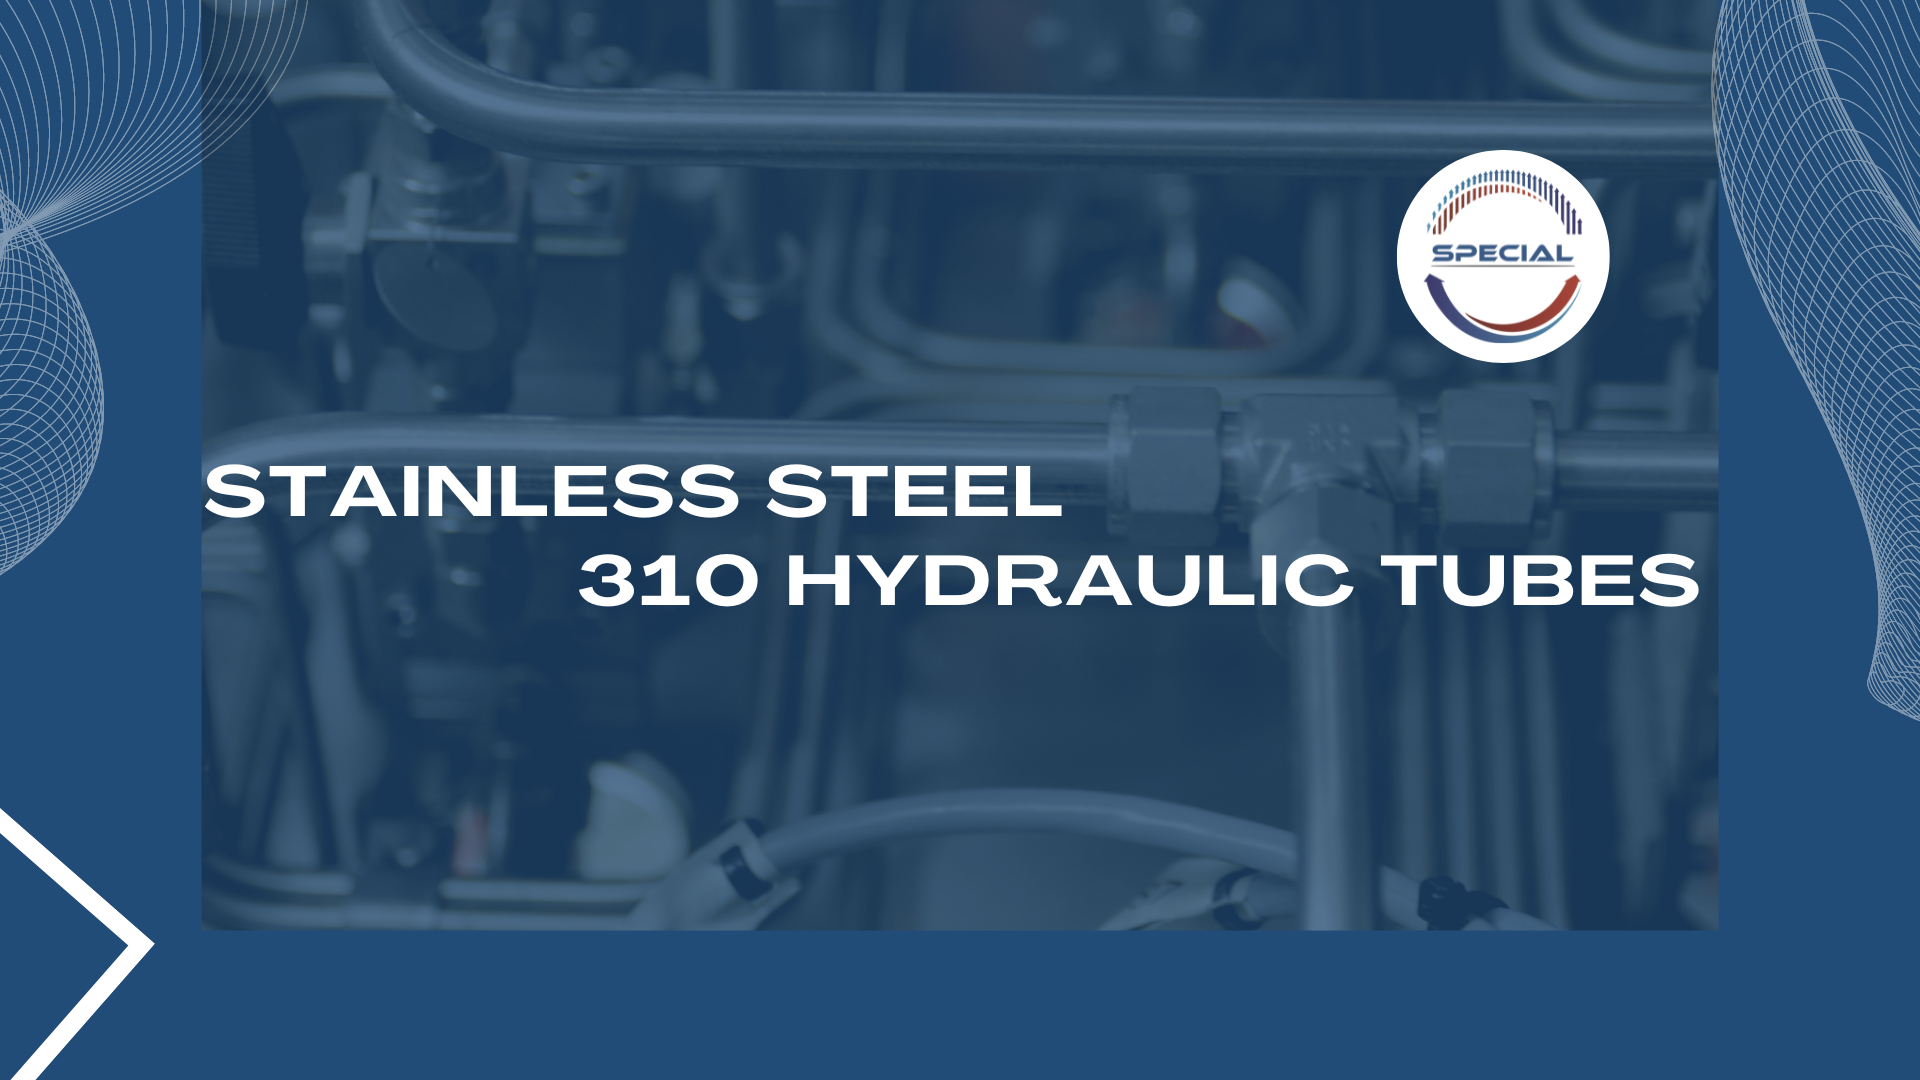 Stainless Steel 310 Hydraulic Tubes